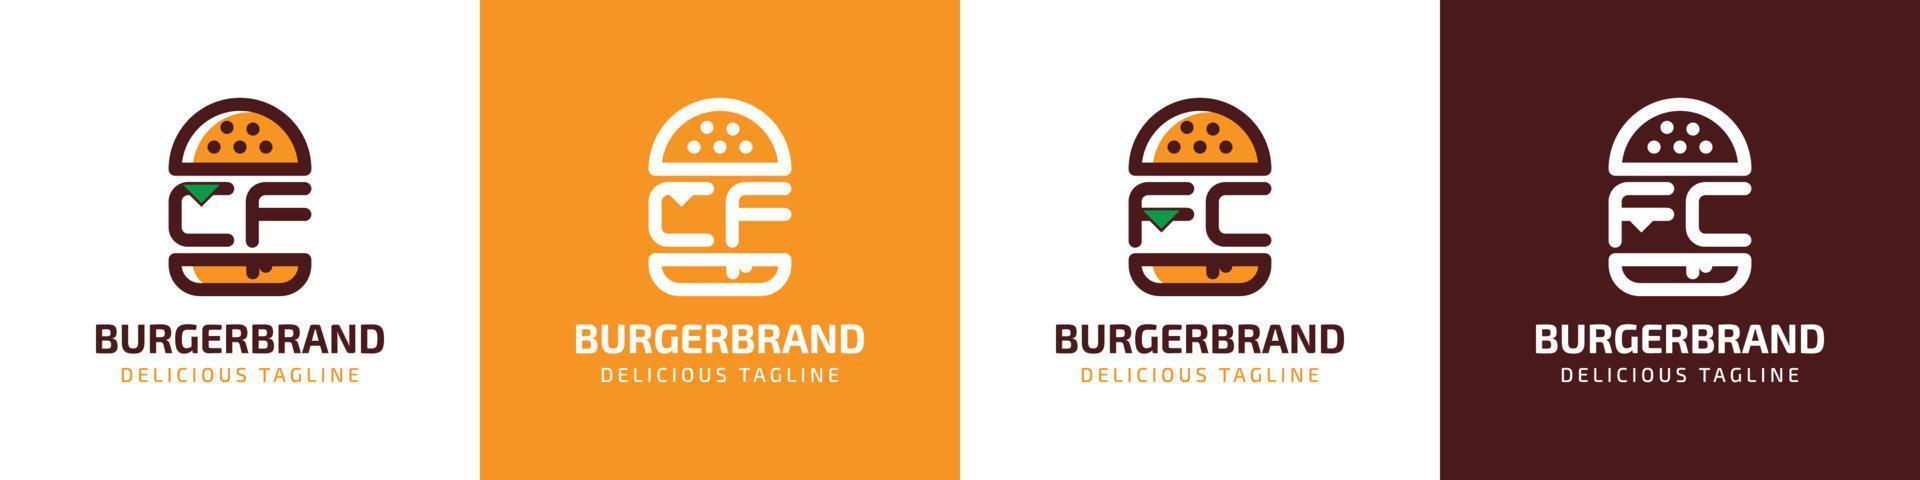 Letter CF and FC Burger Logo, suitable for any business related to burger with CF or FC initials. vector